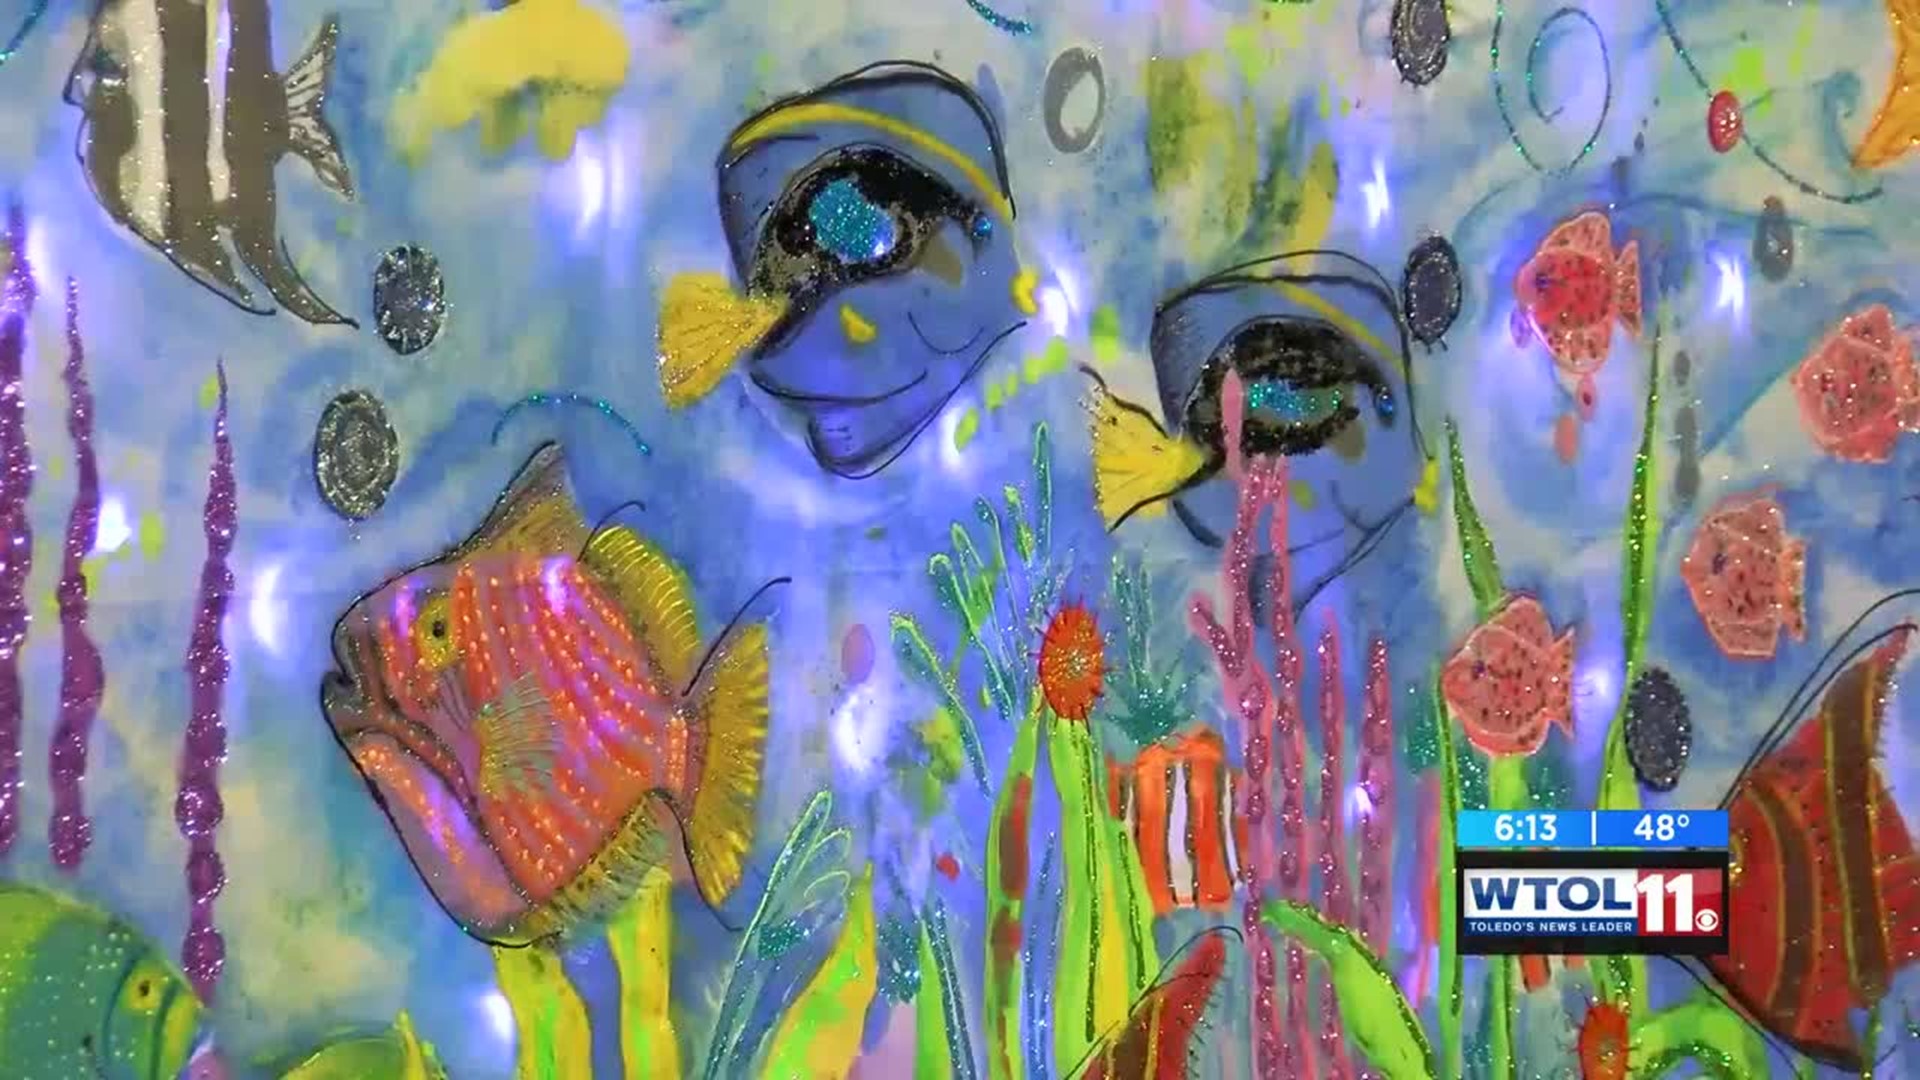 'Unruly Artists' create ocean scene at zoo